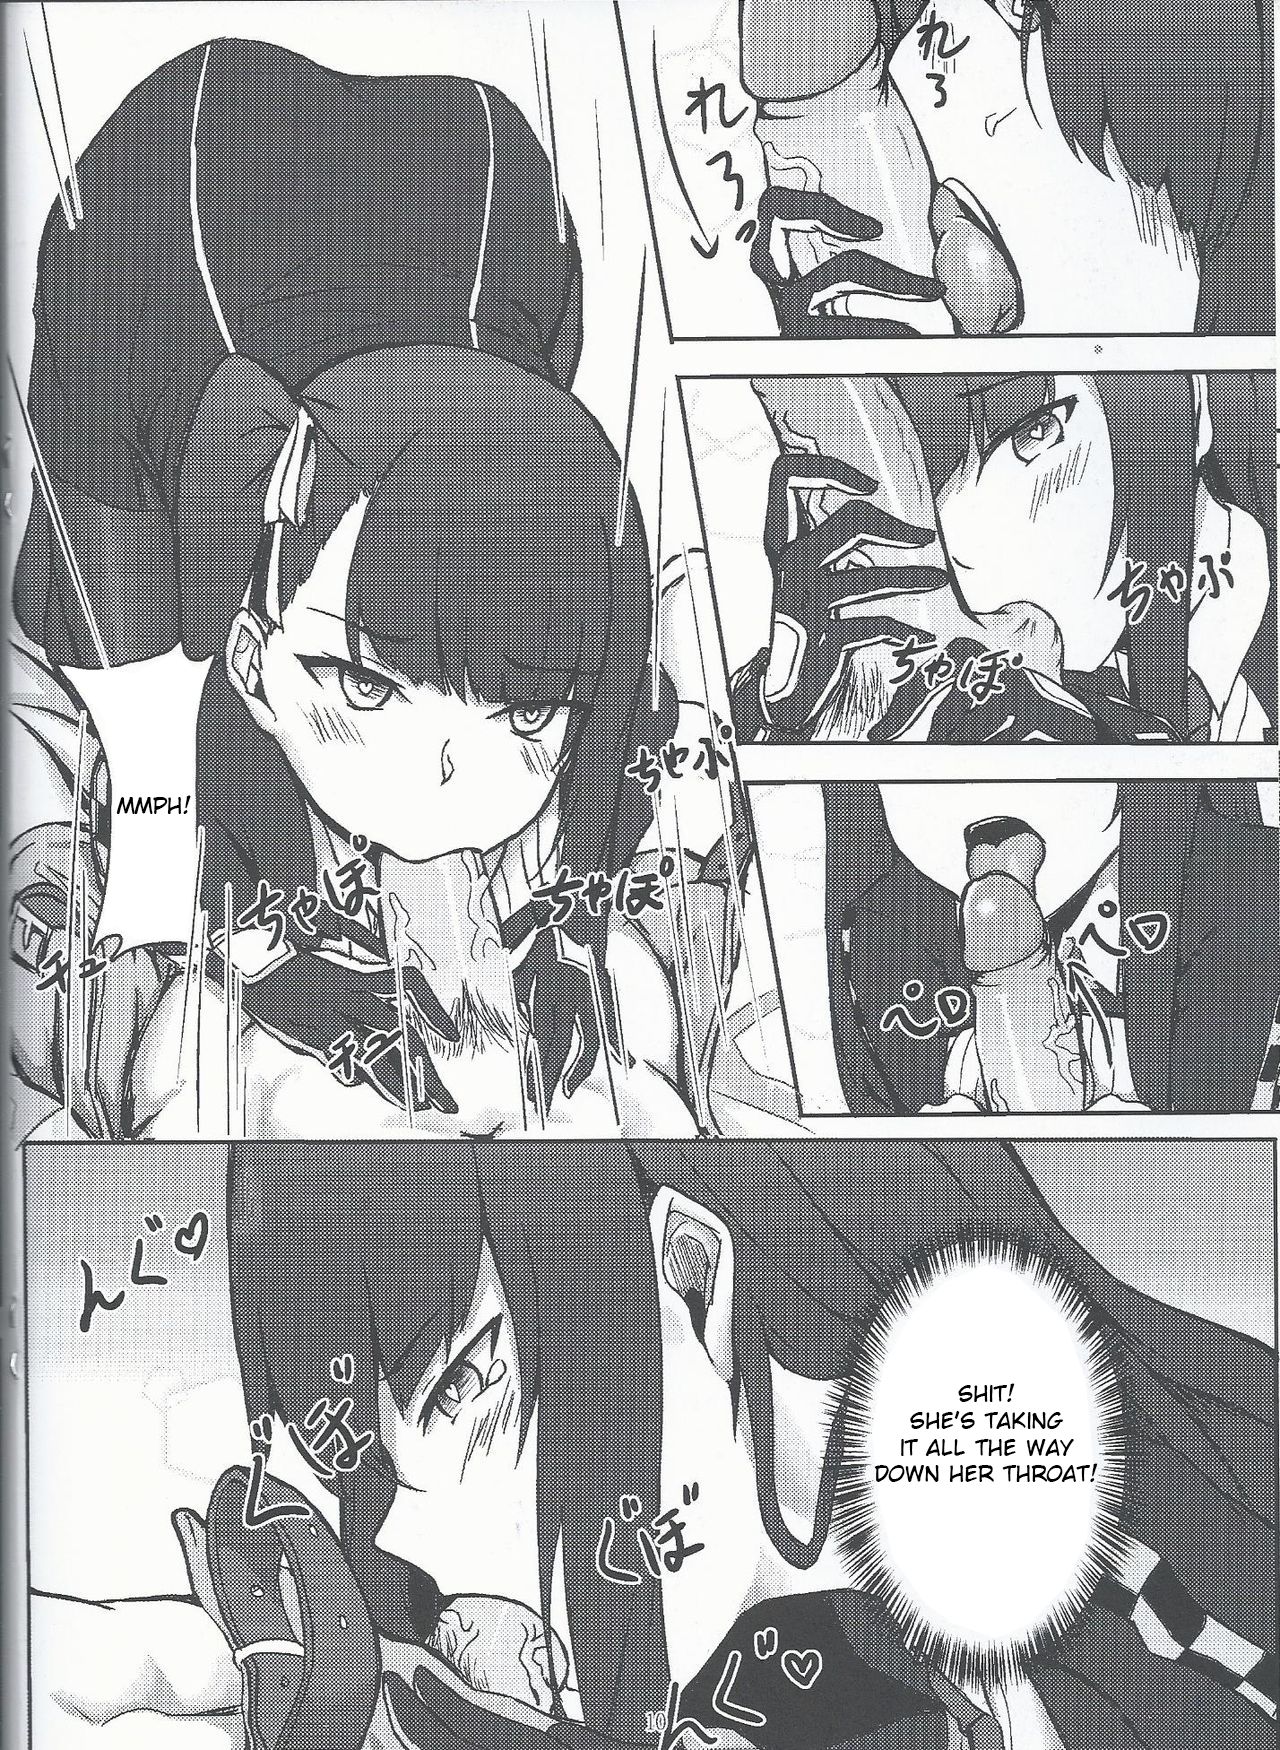 (FF32) [Sumi (九曜)] I don't know what to title this book, but anyway it's about WA2000 (Girls Frontline) [English] page 9 full